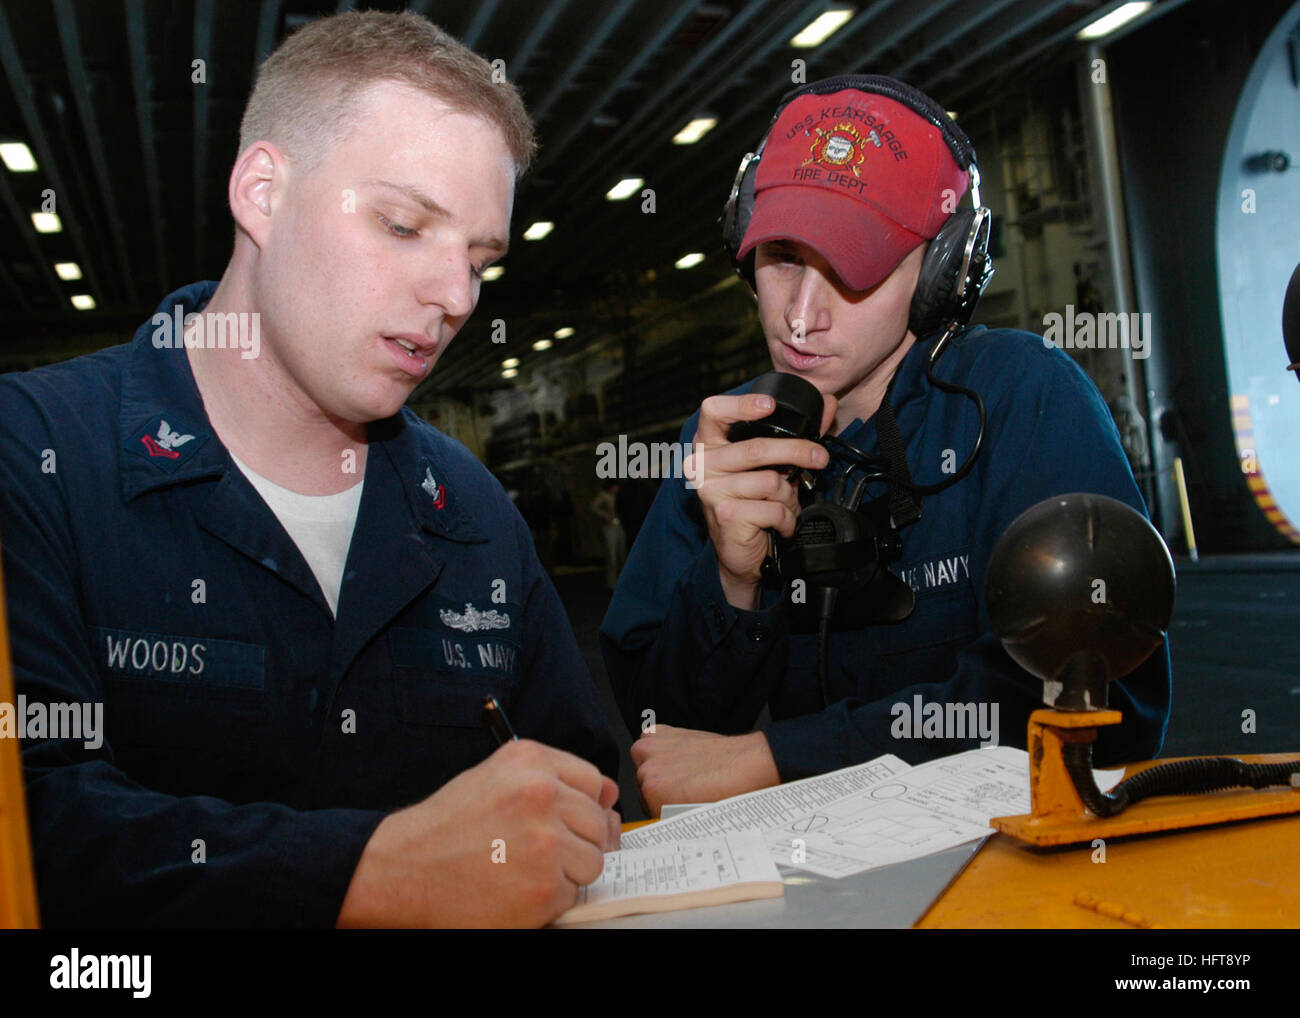 061101-N-7292N-036 Norfolk, Va. (Nov. 1, 2006) - Damage Controlman Fireman John Bukovinsky relays a message through the ship's sound powered phone system as Damage Controlman 2nd Class Andrew Woods annotates the message during damage control competition events held on board the amphibious assault ship USS Kearsarge (LHD 3) in support of Surface Line Week. U.S. Navy photo by Mass Communication Specialist 3rd Class Christen R. Nicholas (RELEASED) US Navy 061101-N-7292N-036 Damage Controlman Fireman John Bukovinsky relays a message through the ship's sound powered phone system Stock Photo